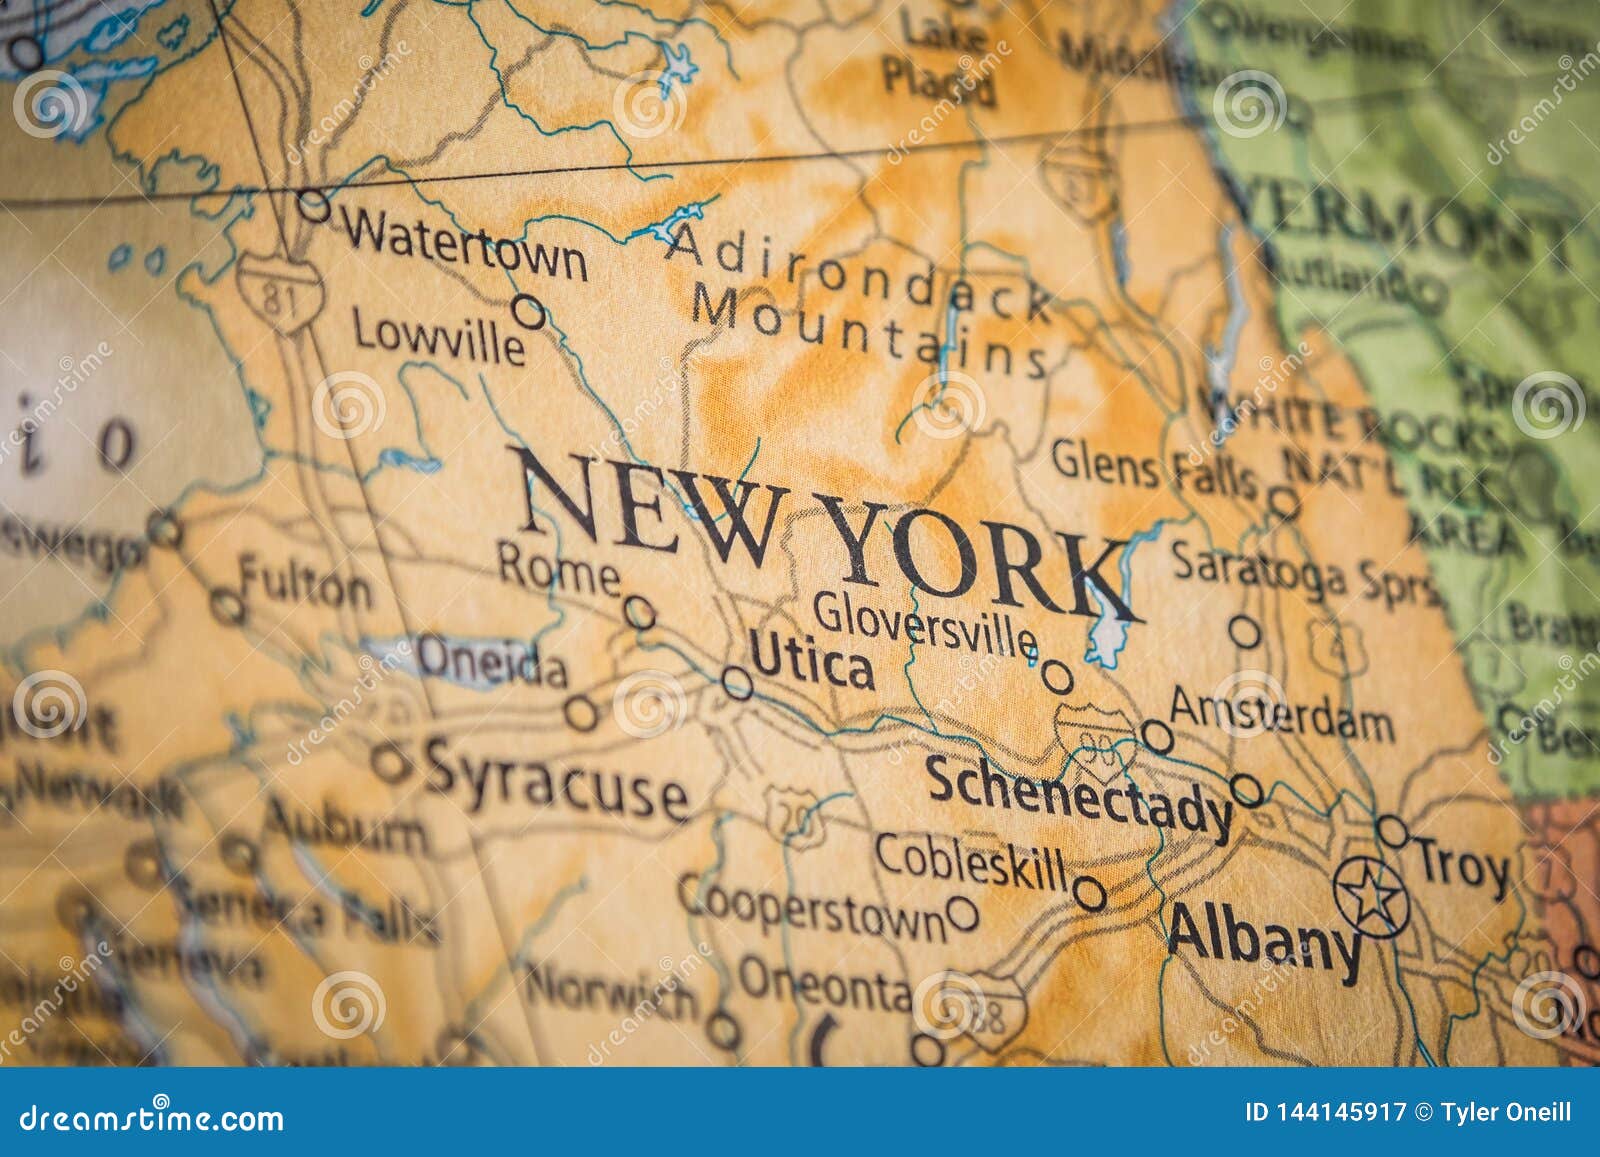 selective focus of new york state on a geographical and political state map of the usa